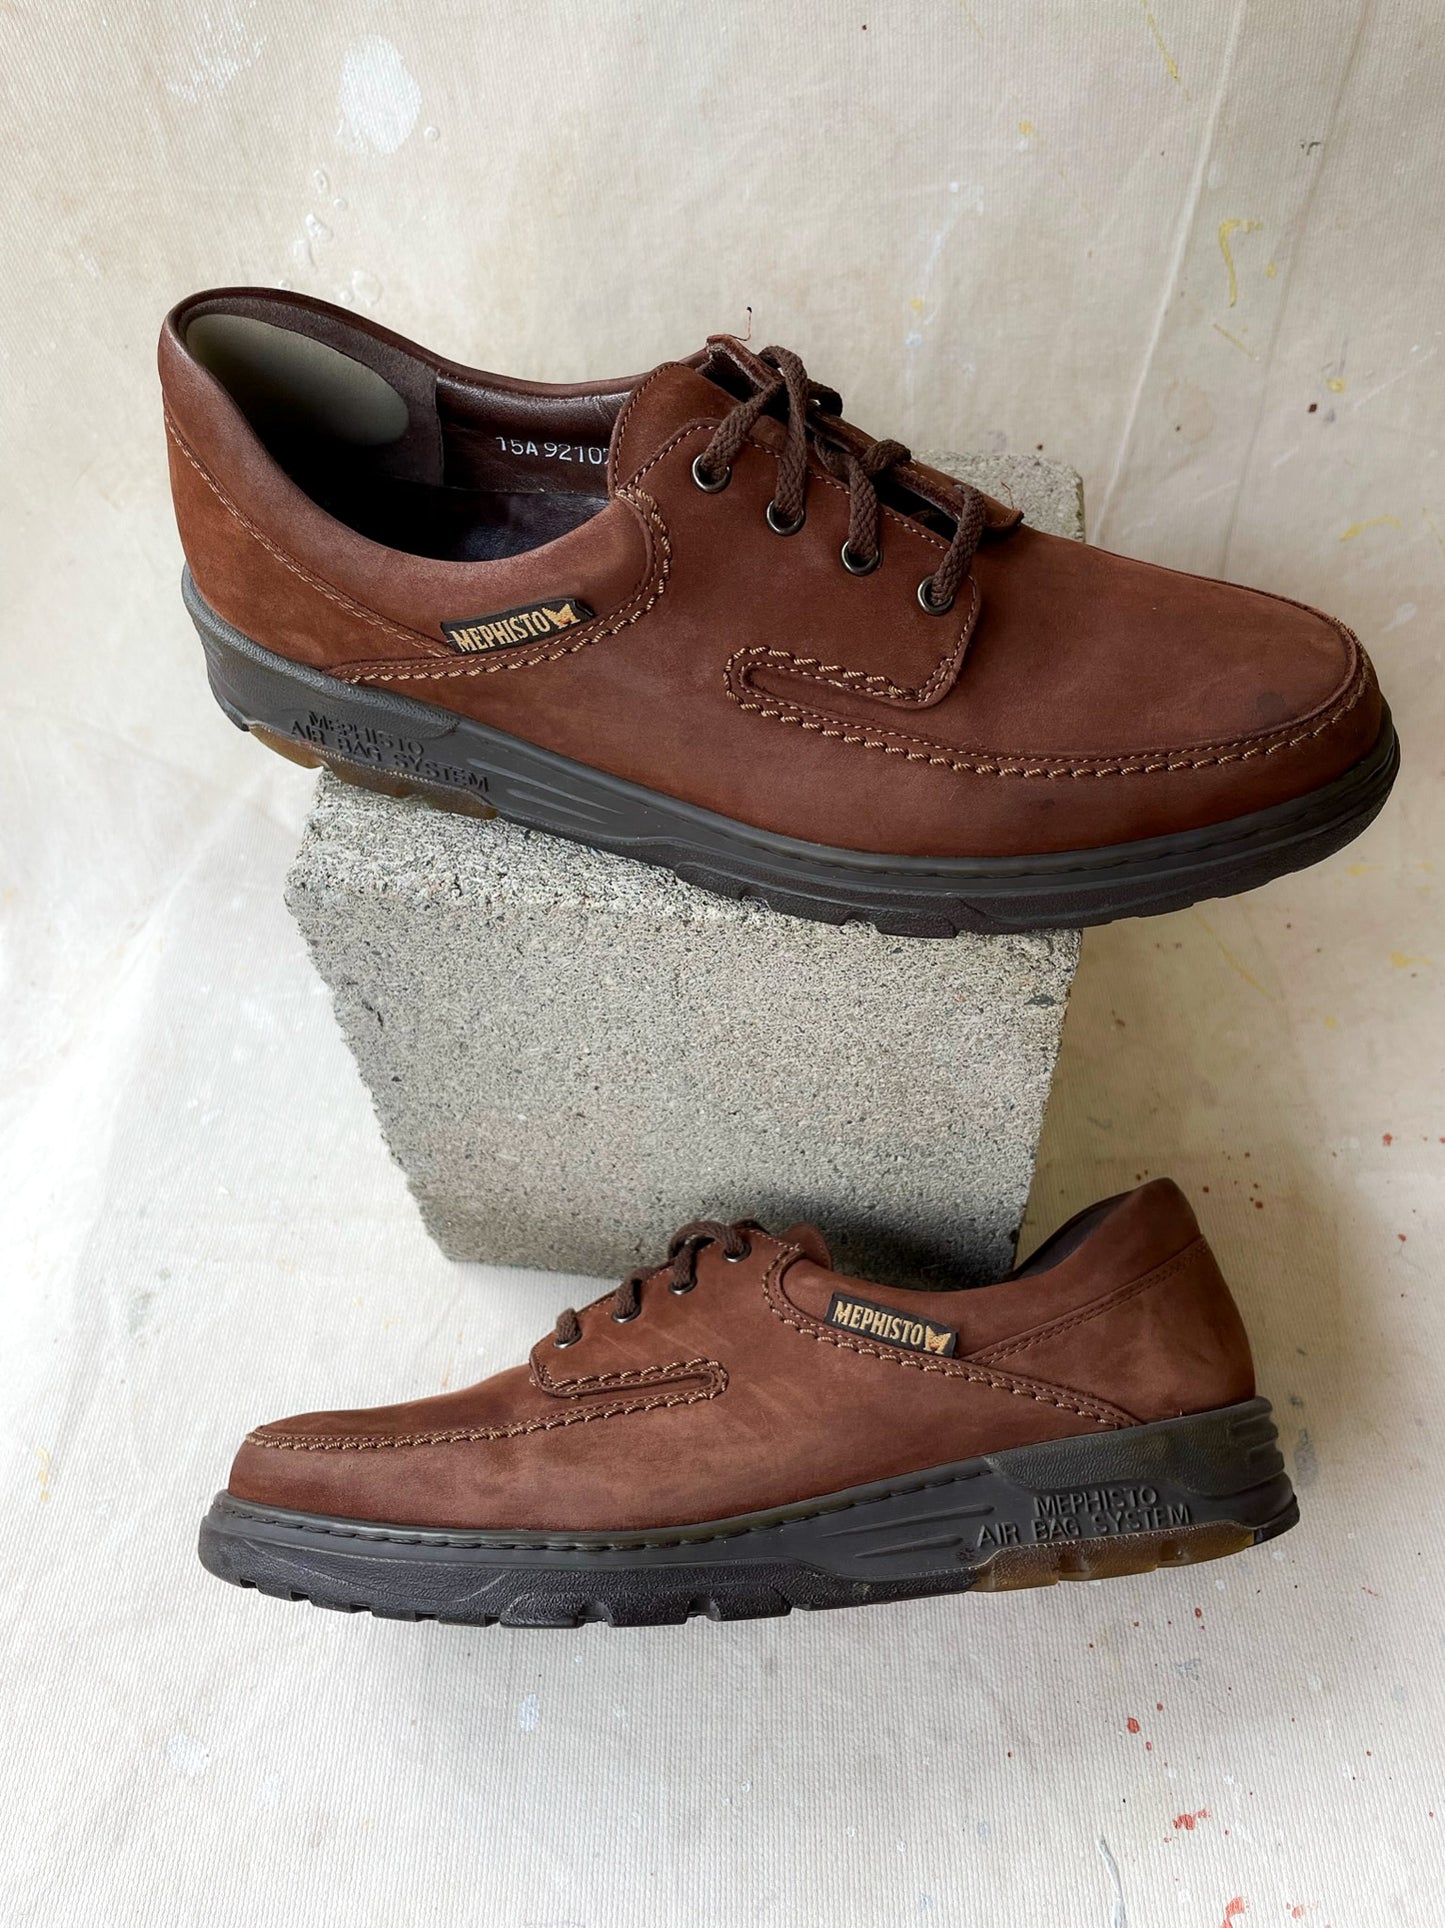 Mephisto Shoes—[10.5W / 9M]